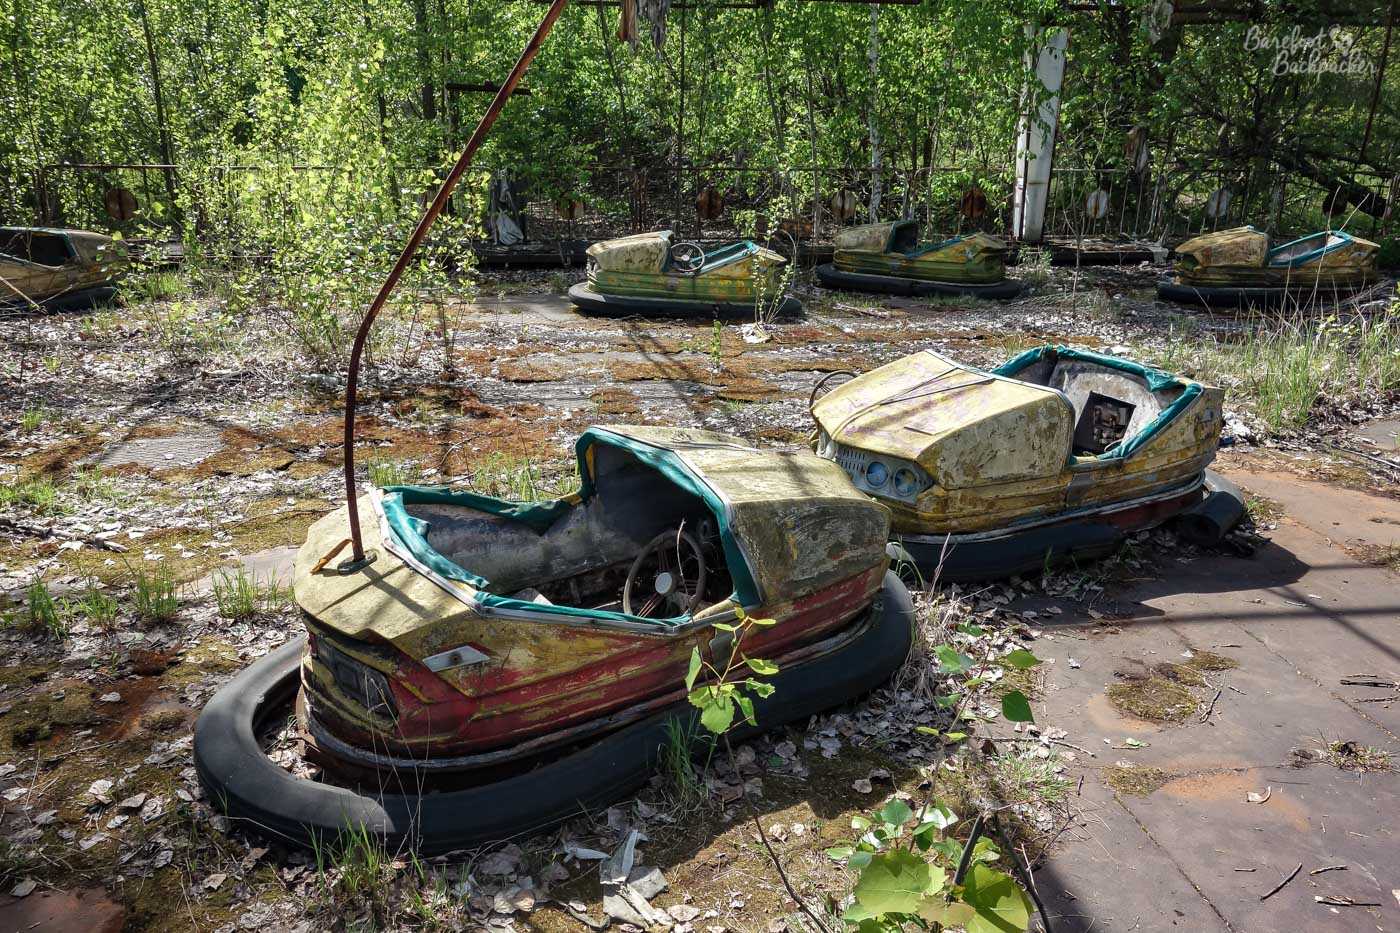 A series of dodgem cars, rusting in the open air. One still has its connection mechanism to the roof, but there is no roof any more. Two in the foreground are head-to-head, forever nose-booping. The ground is a mass of fallen leaves, moss, weeds, and twig.